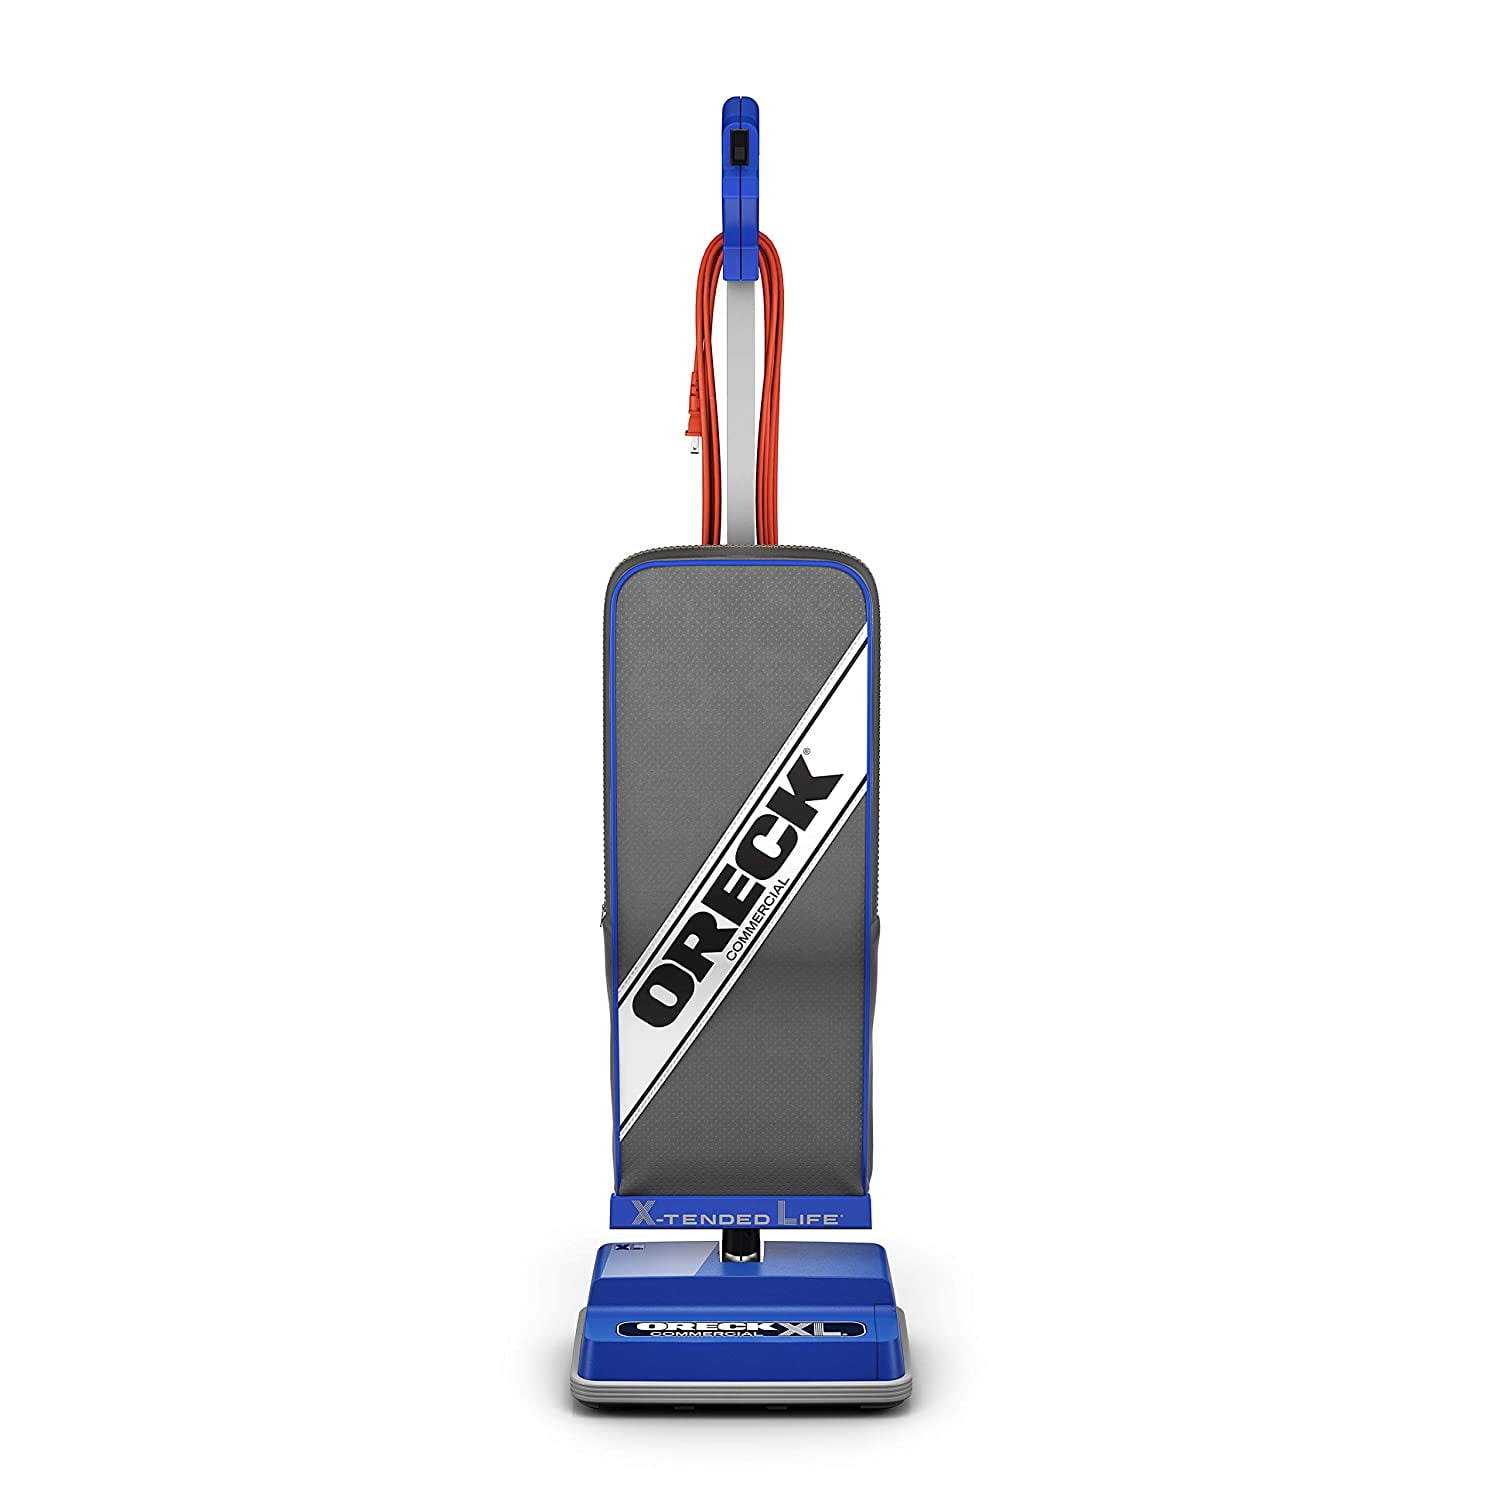 Oreck Commercial XL2100RHS Commercial Upright Vacuum Cleaner XL,Blue 